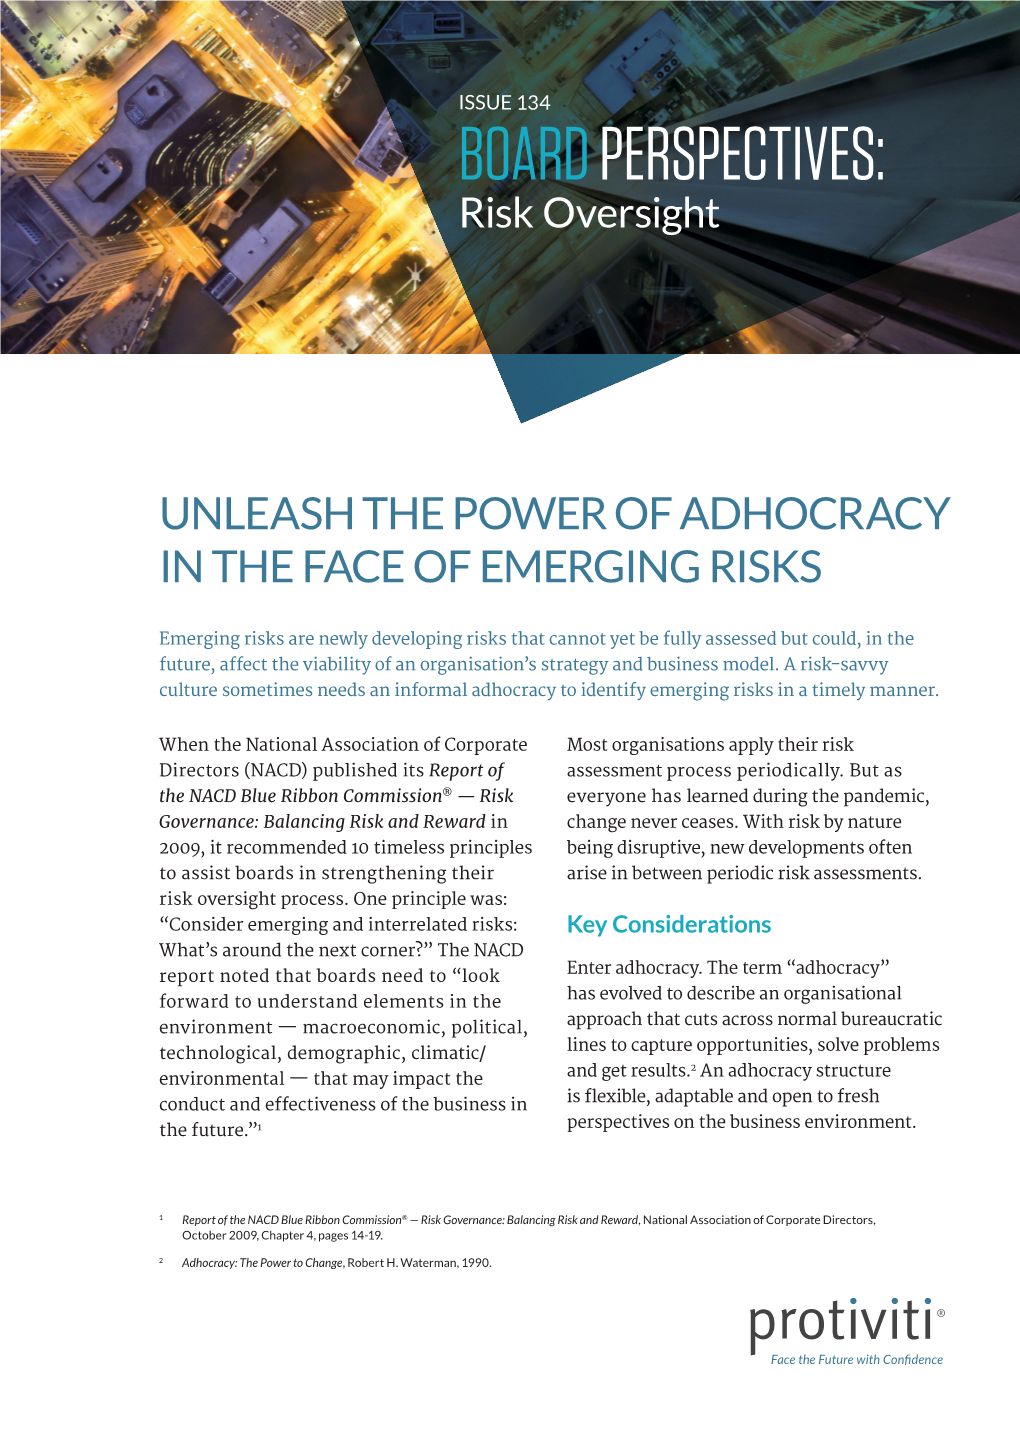 Unleash the Power of Adhocracy in the Face of Emergency Risks